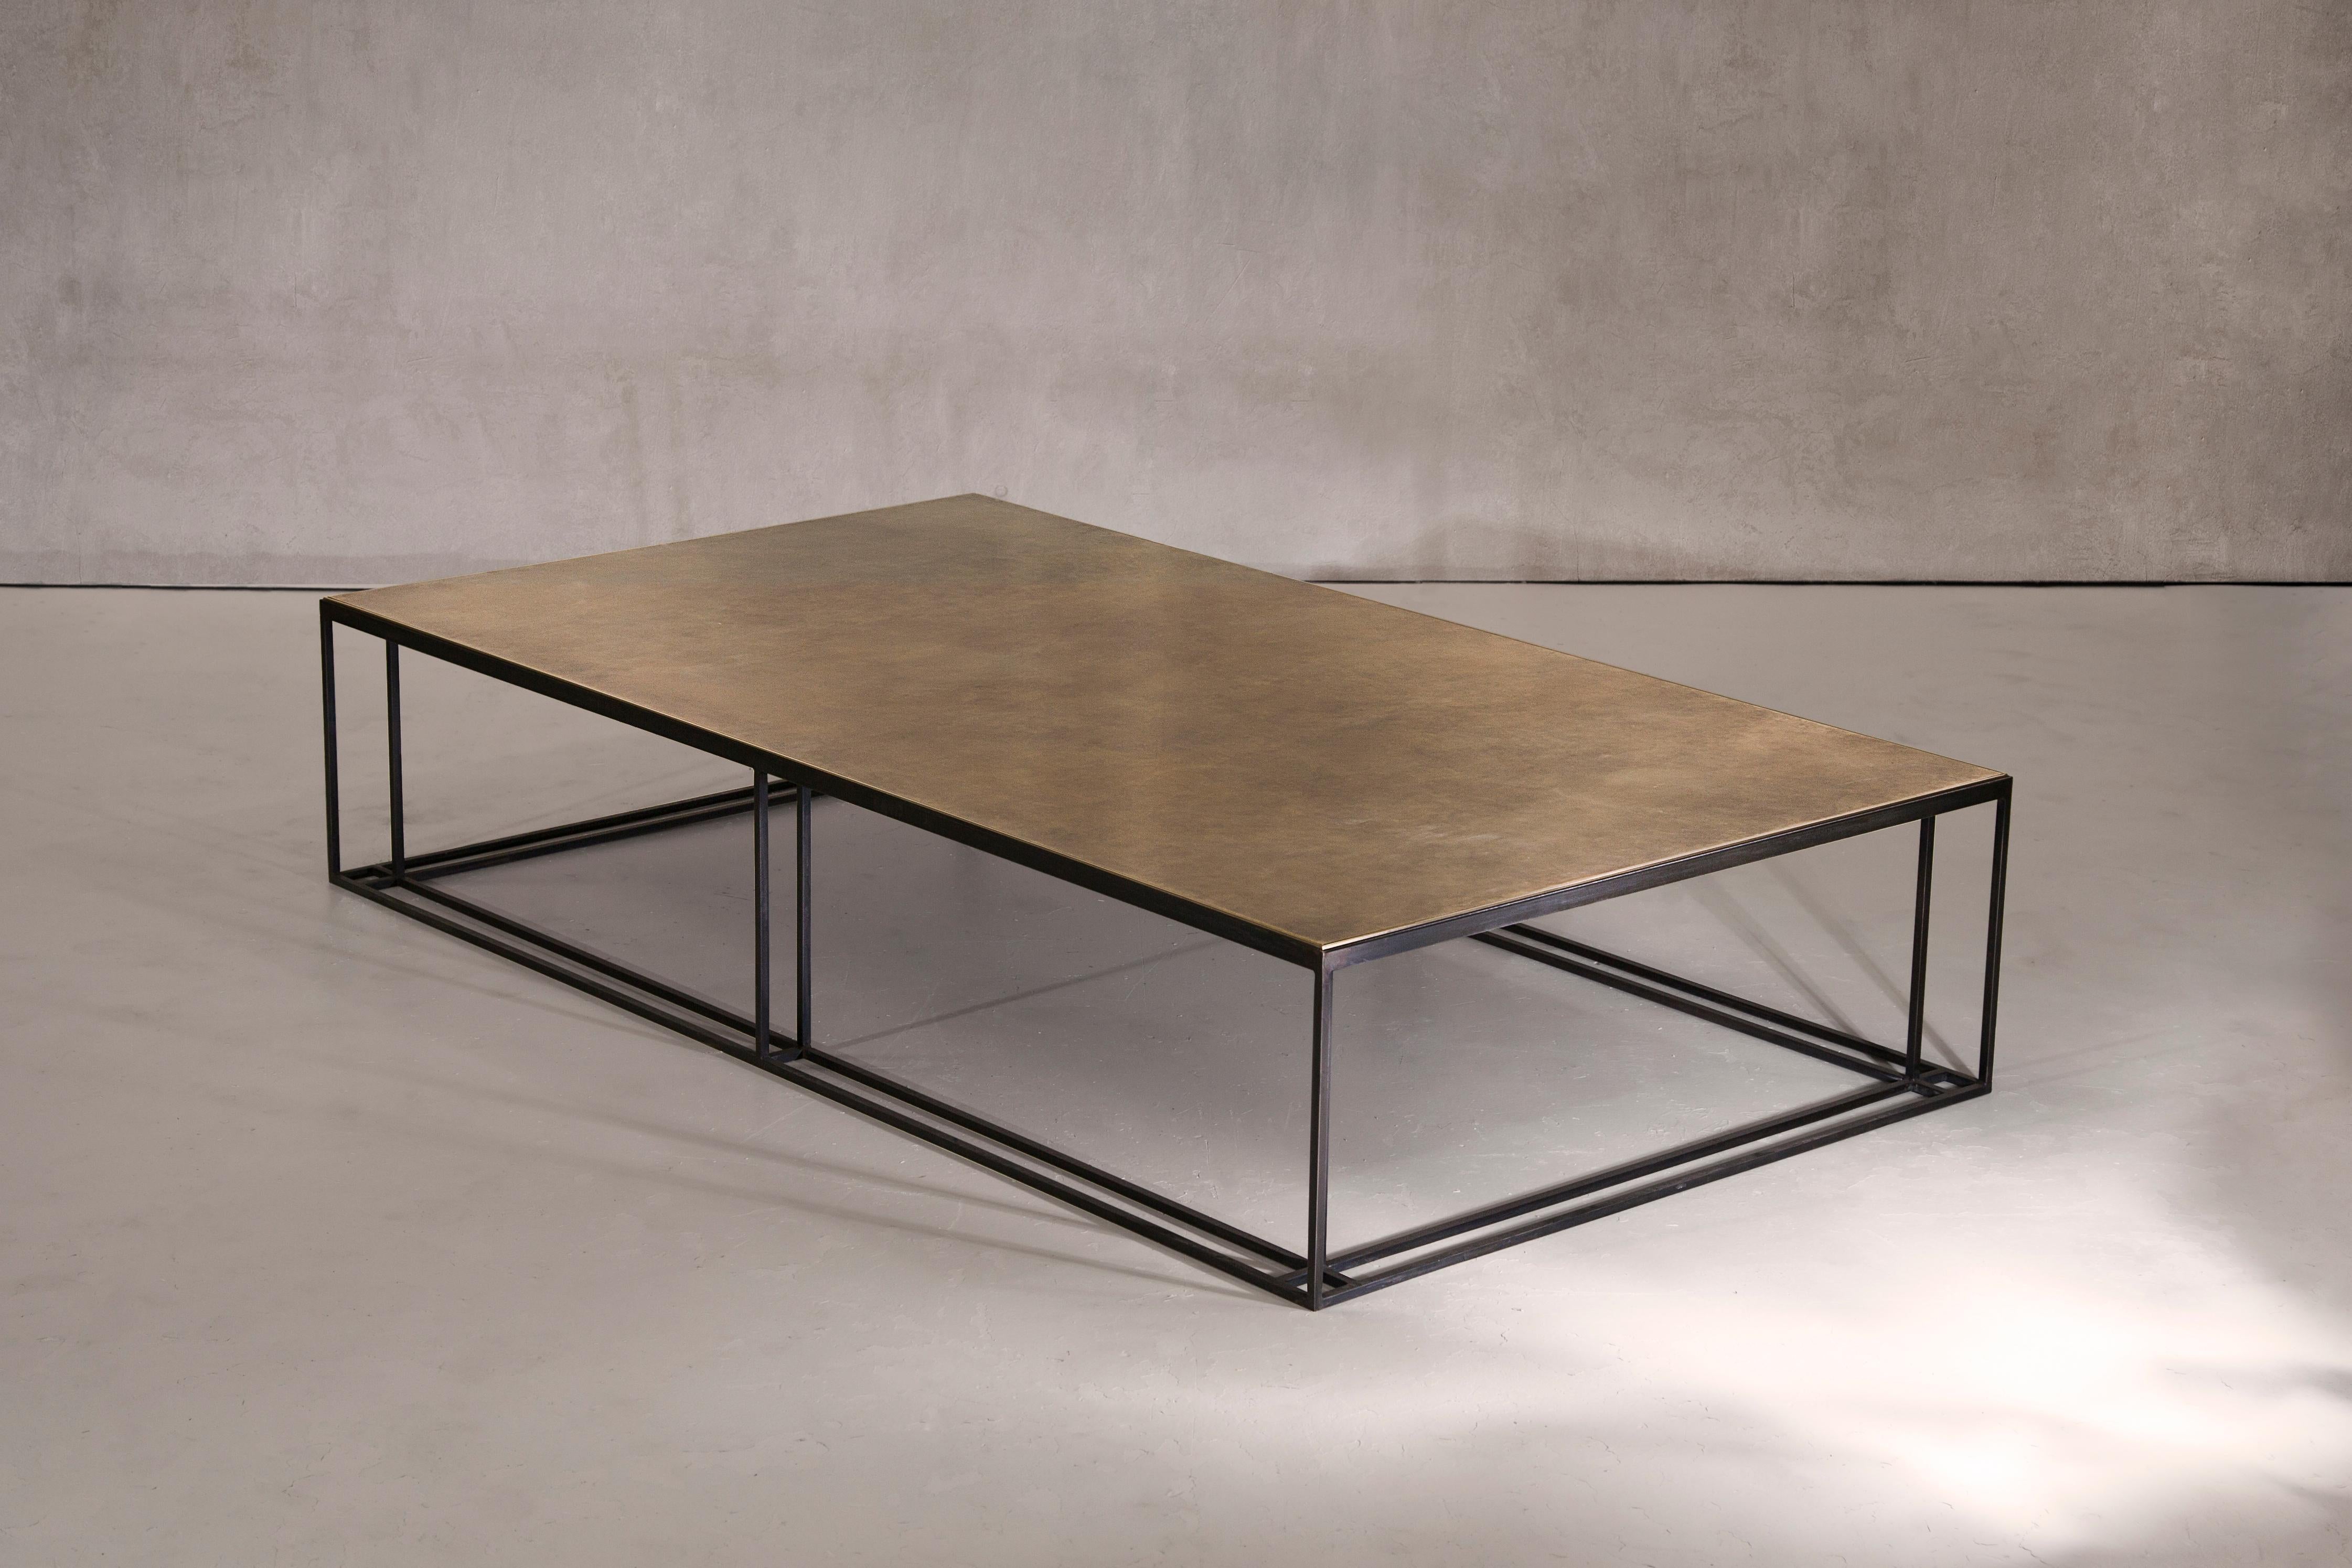 A coffee table in blackened steel and patinated brass, with a polished brass trim. Hand crafted to order in the North. Bespoke finishes and sizes are available.

Measures: 160cm width x 90cm depth x 35cm height.
Custom finishes and sizes